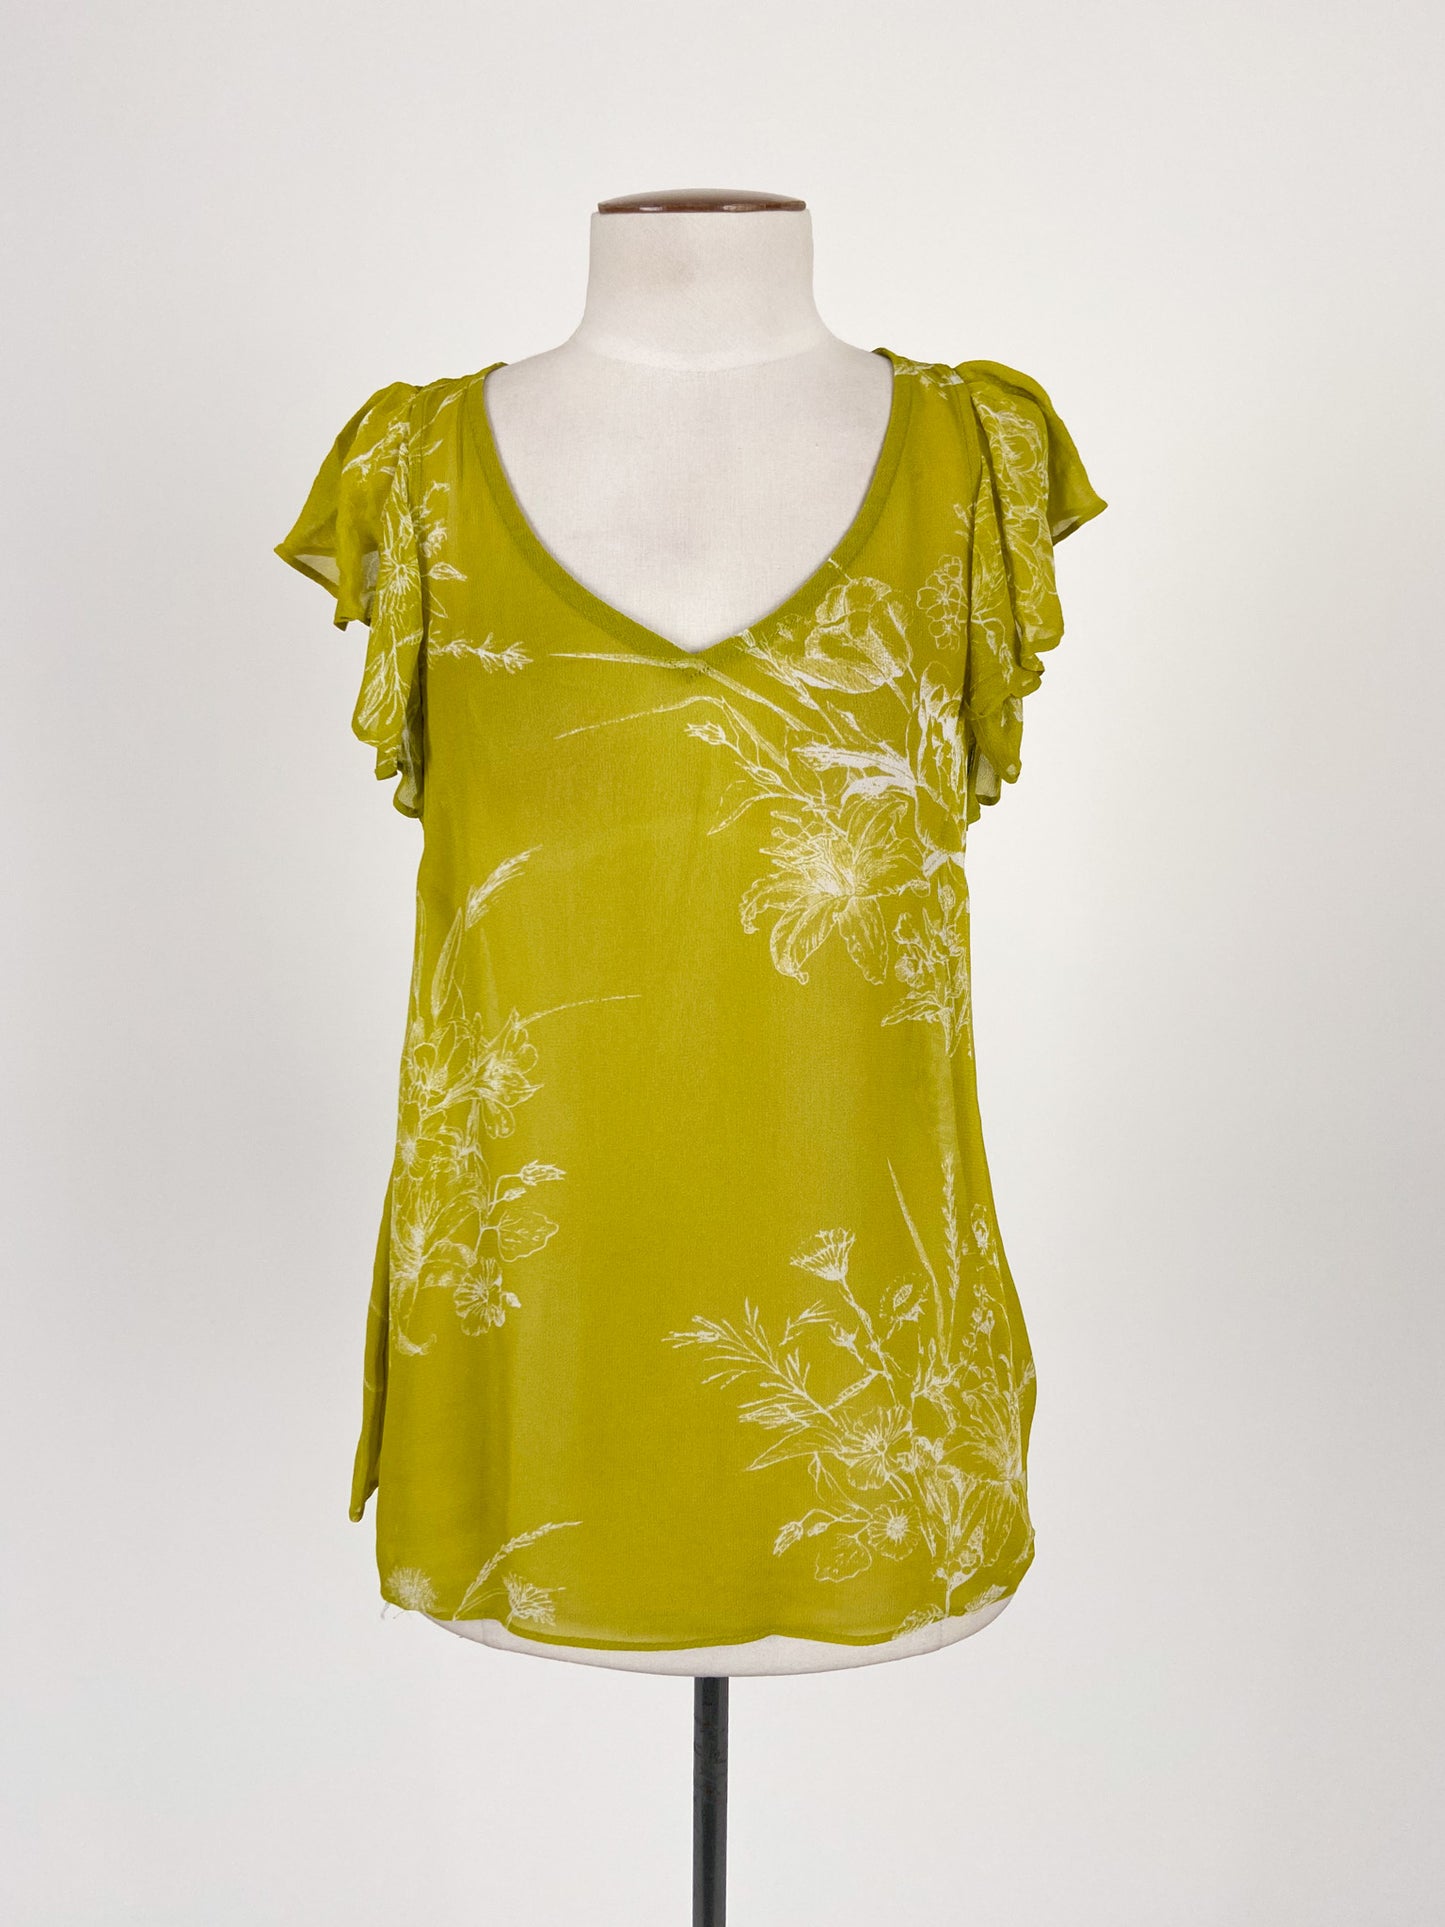 Max | Yellow Casual/Workwear Top | Size 8